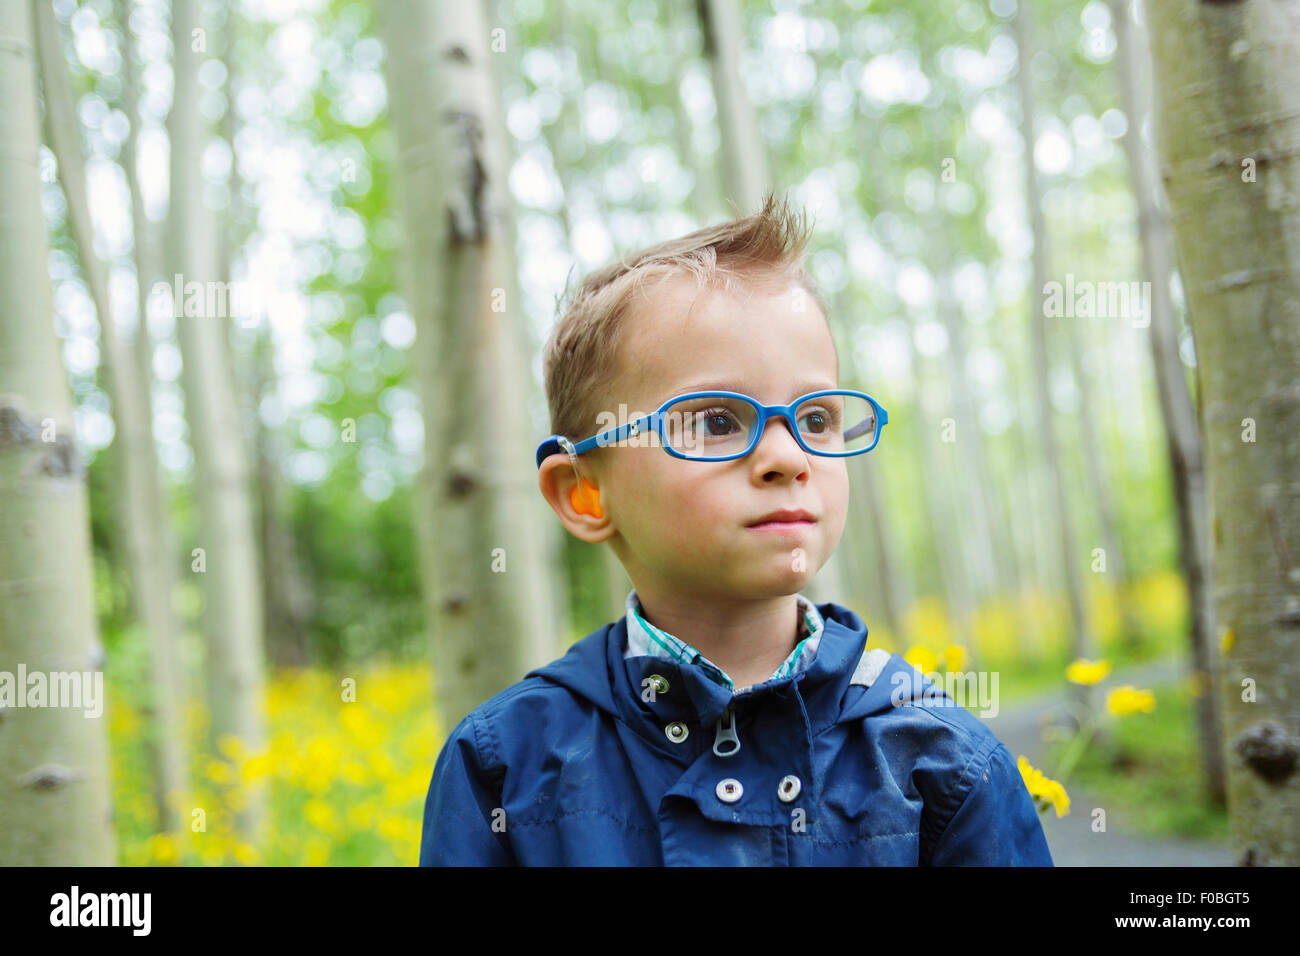 Portrait of cute little boy child outdoors on the nature Stock Photo